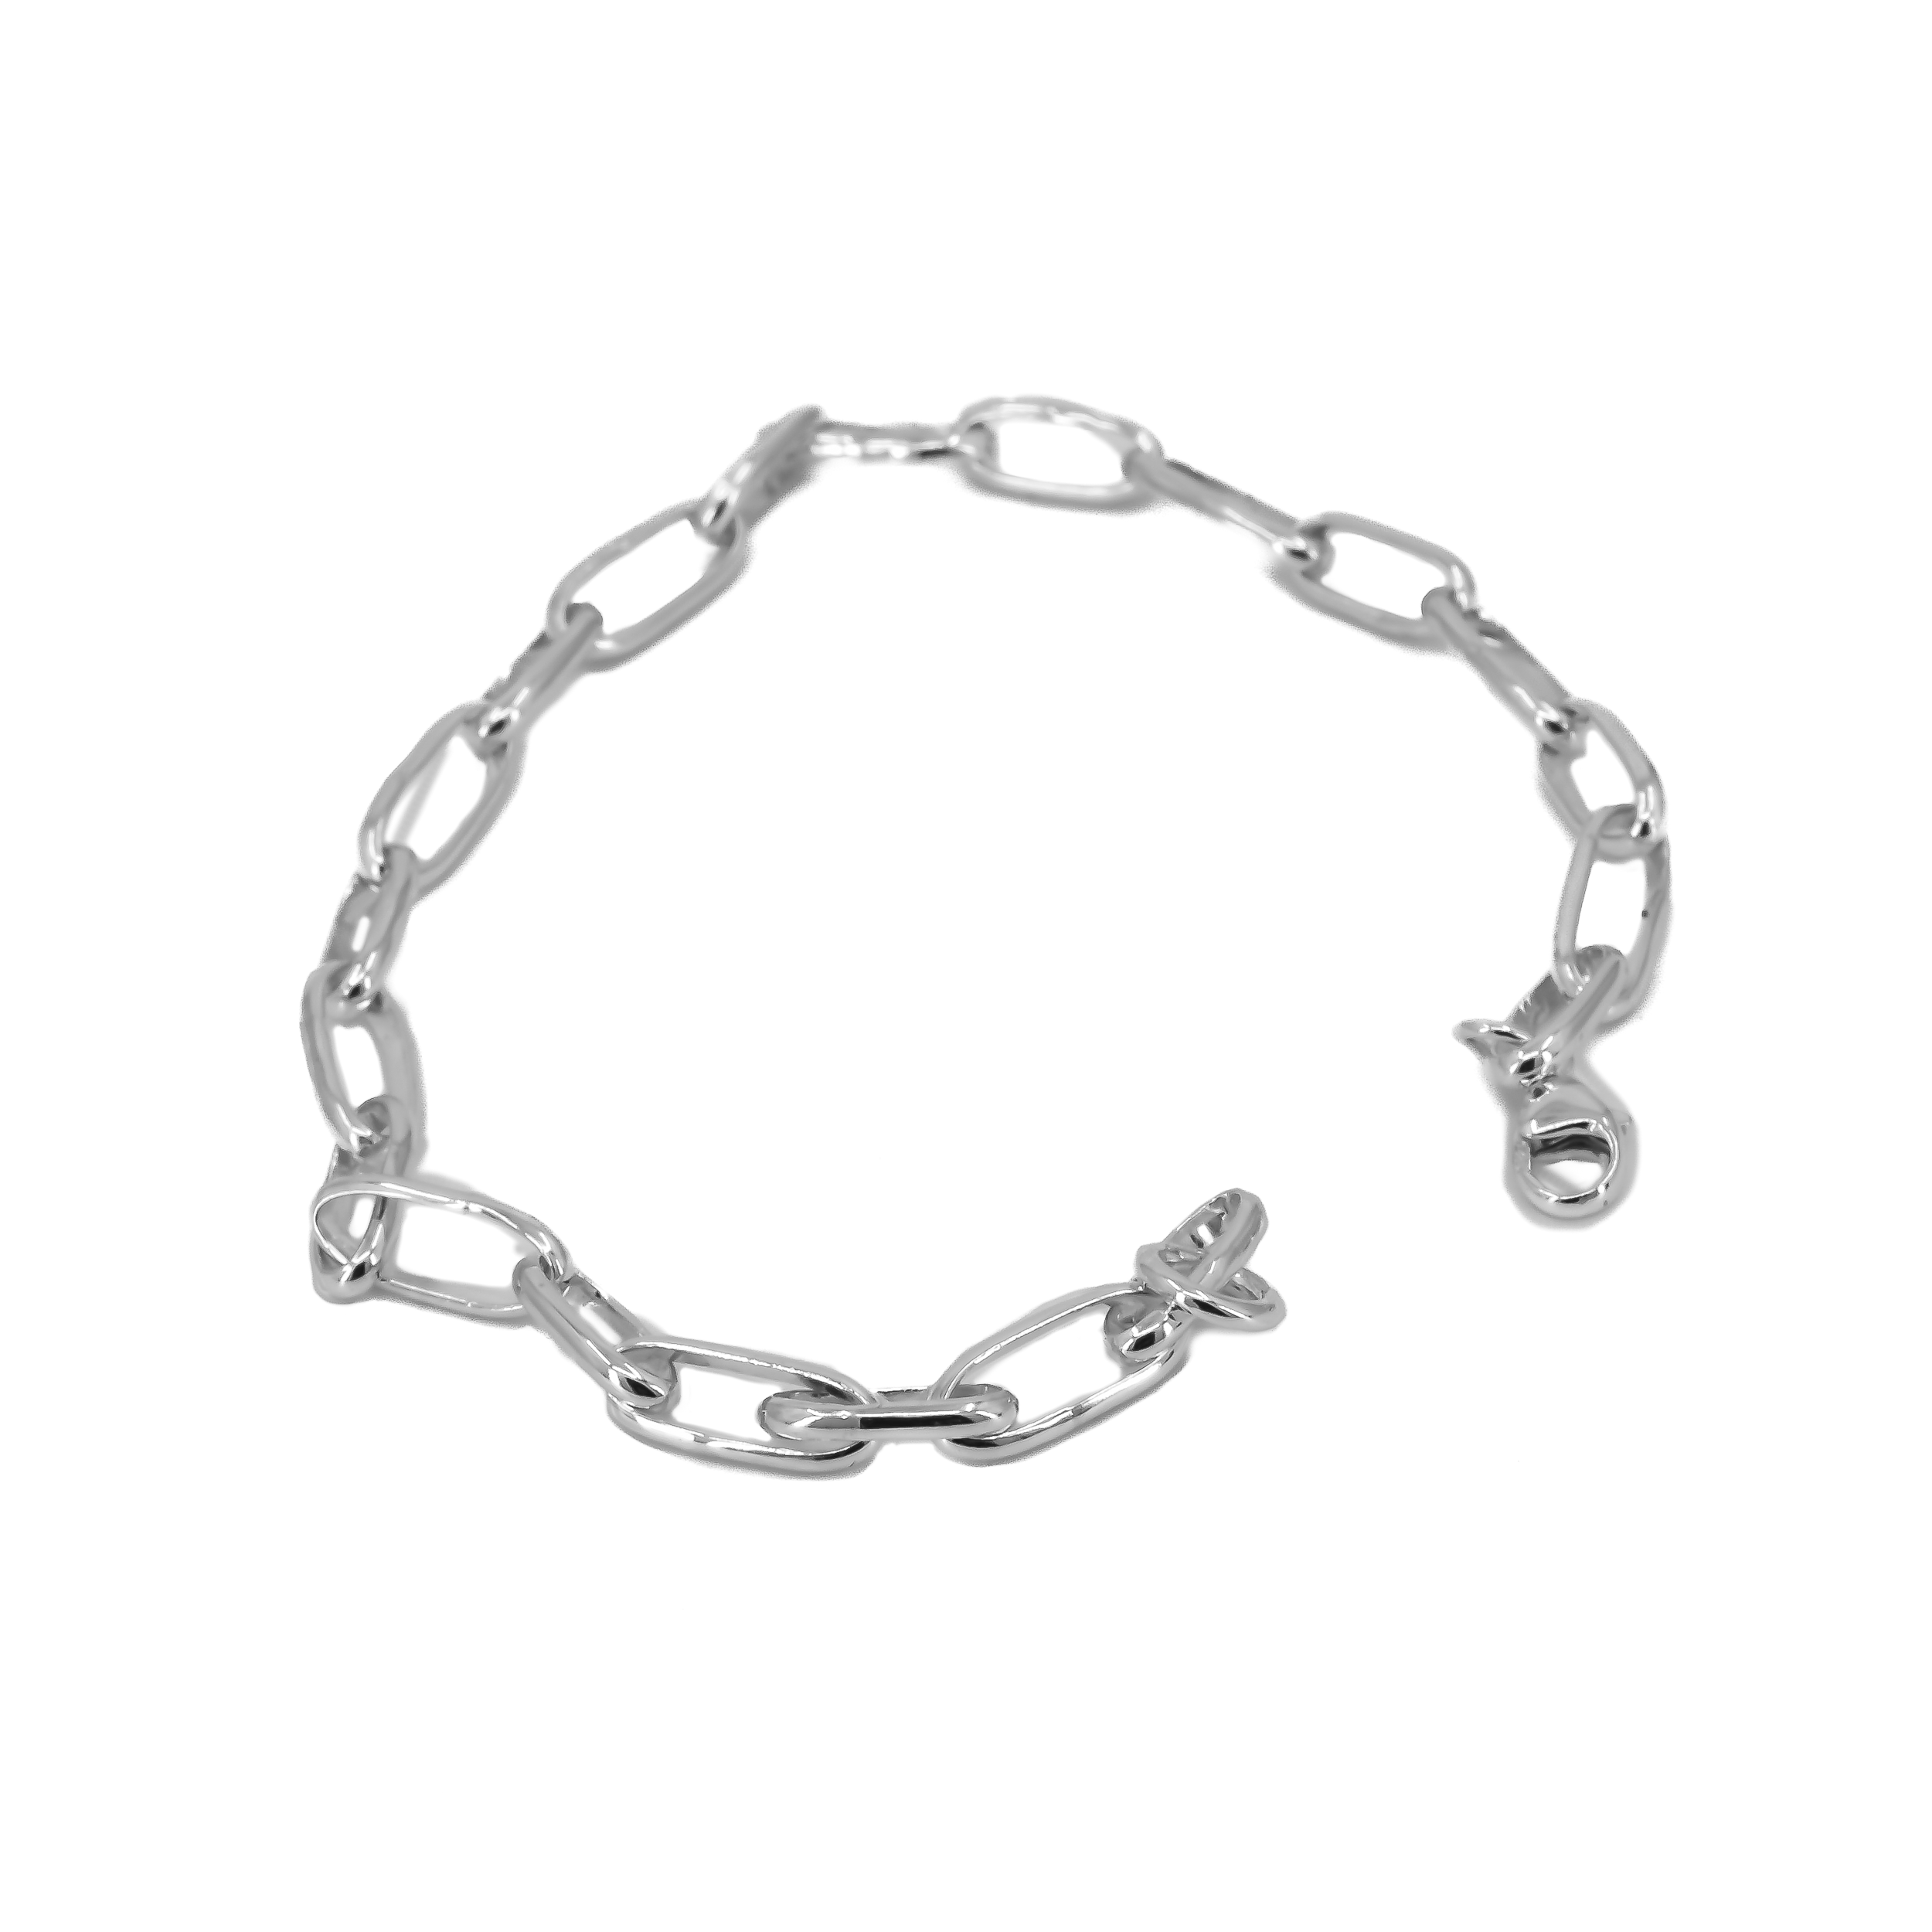 Large paperclip sterling silver chain link bracelet